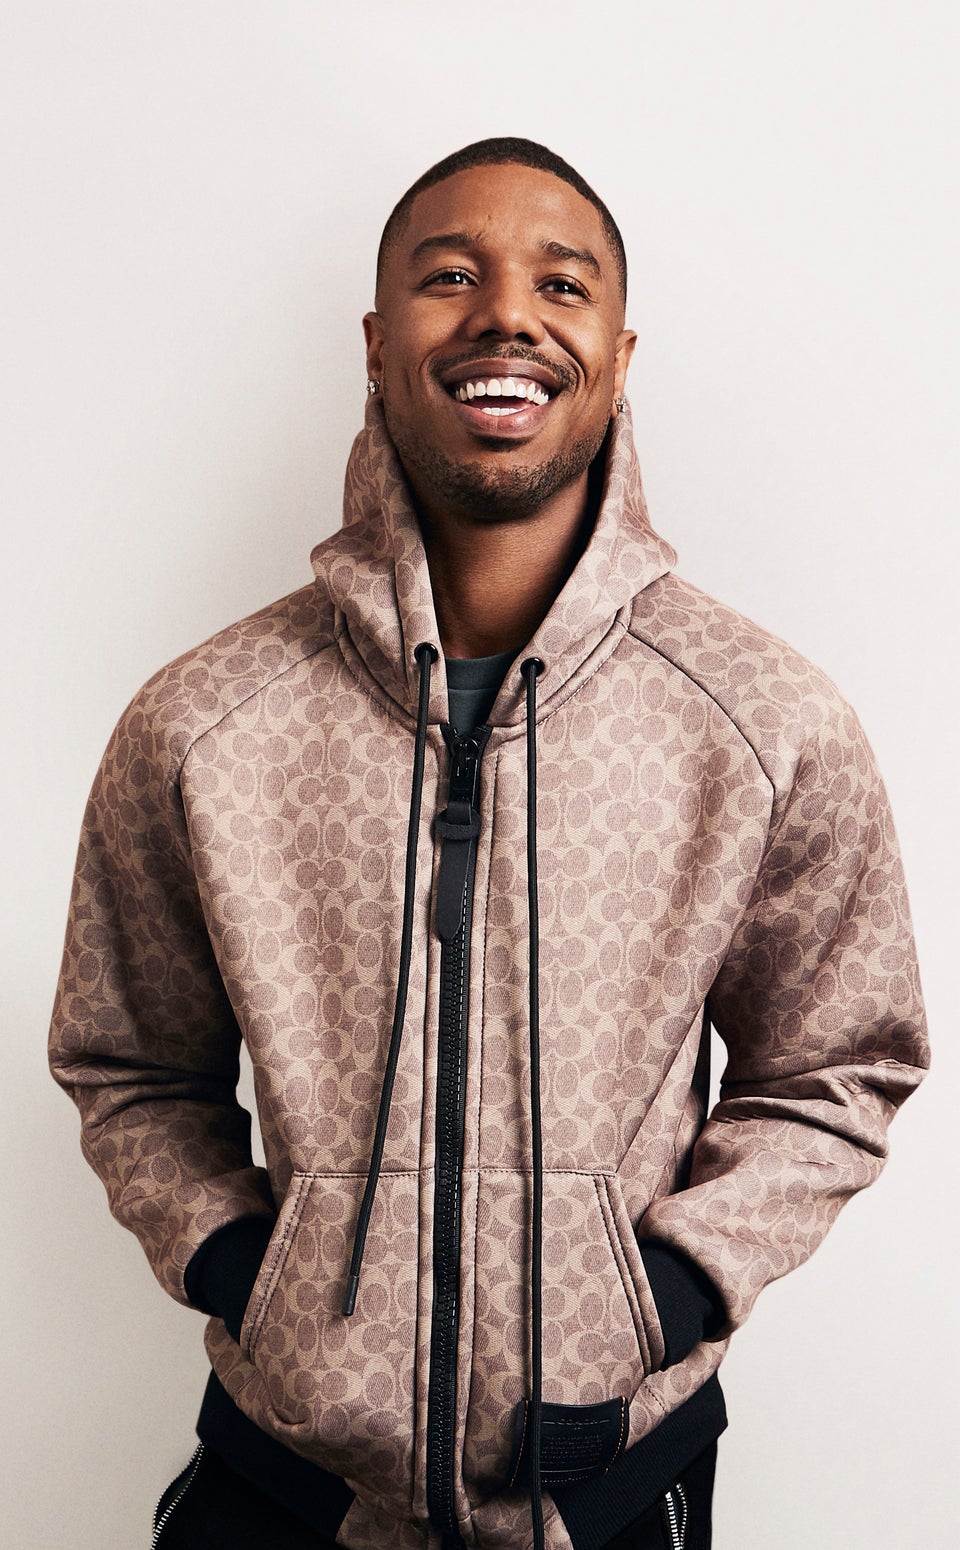 Black Boy Joy! Michael B. Jordan Is The New Face Of Coach Menswear, A First For The Brand